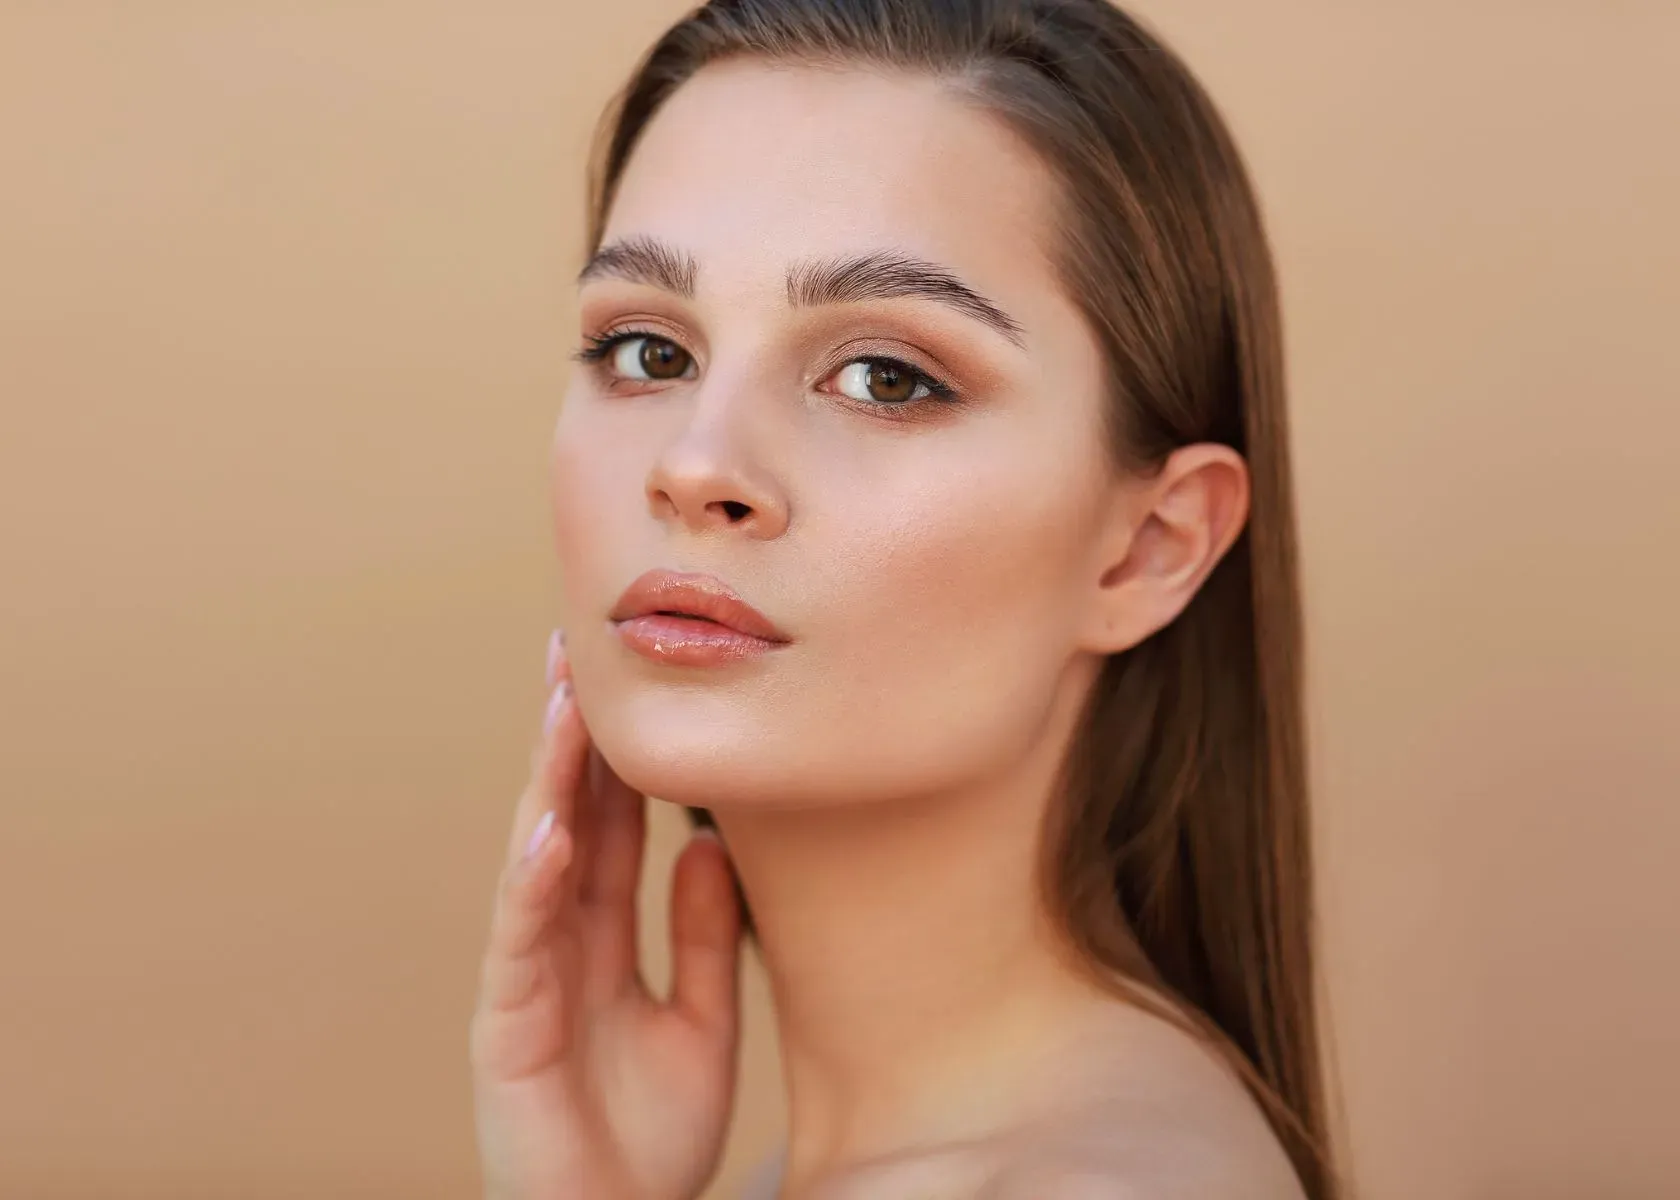 What is Combination Skin and Why Should You Use Water-Based Foundation?